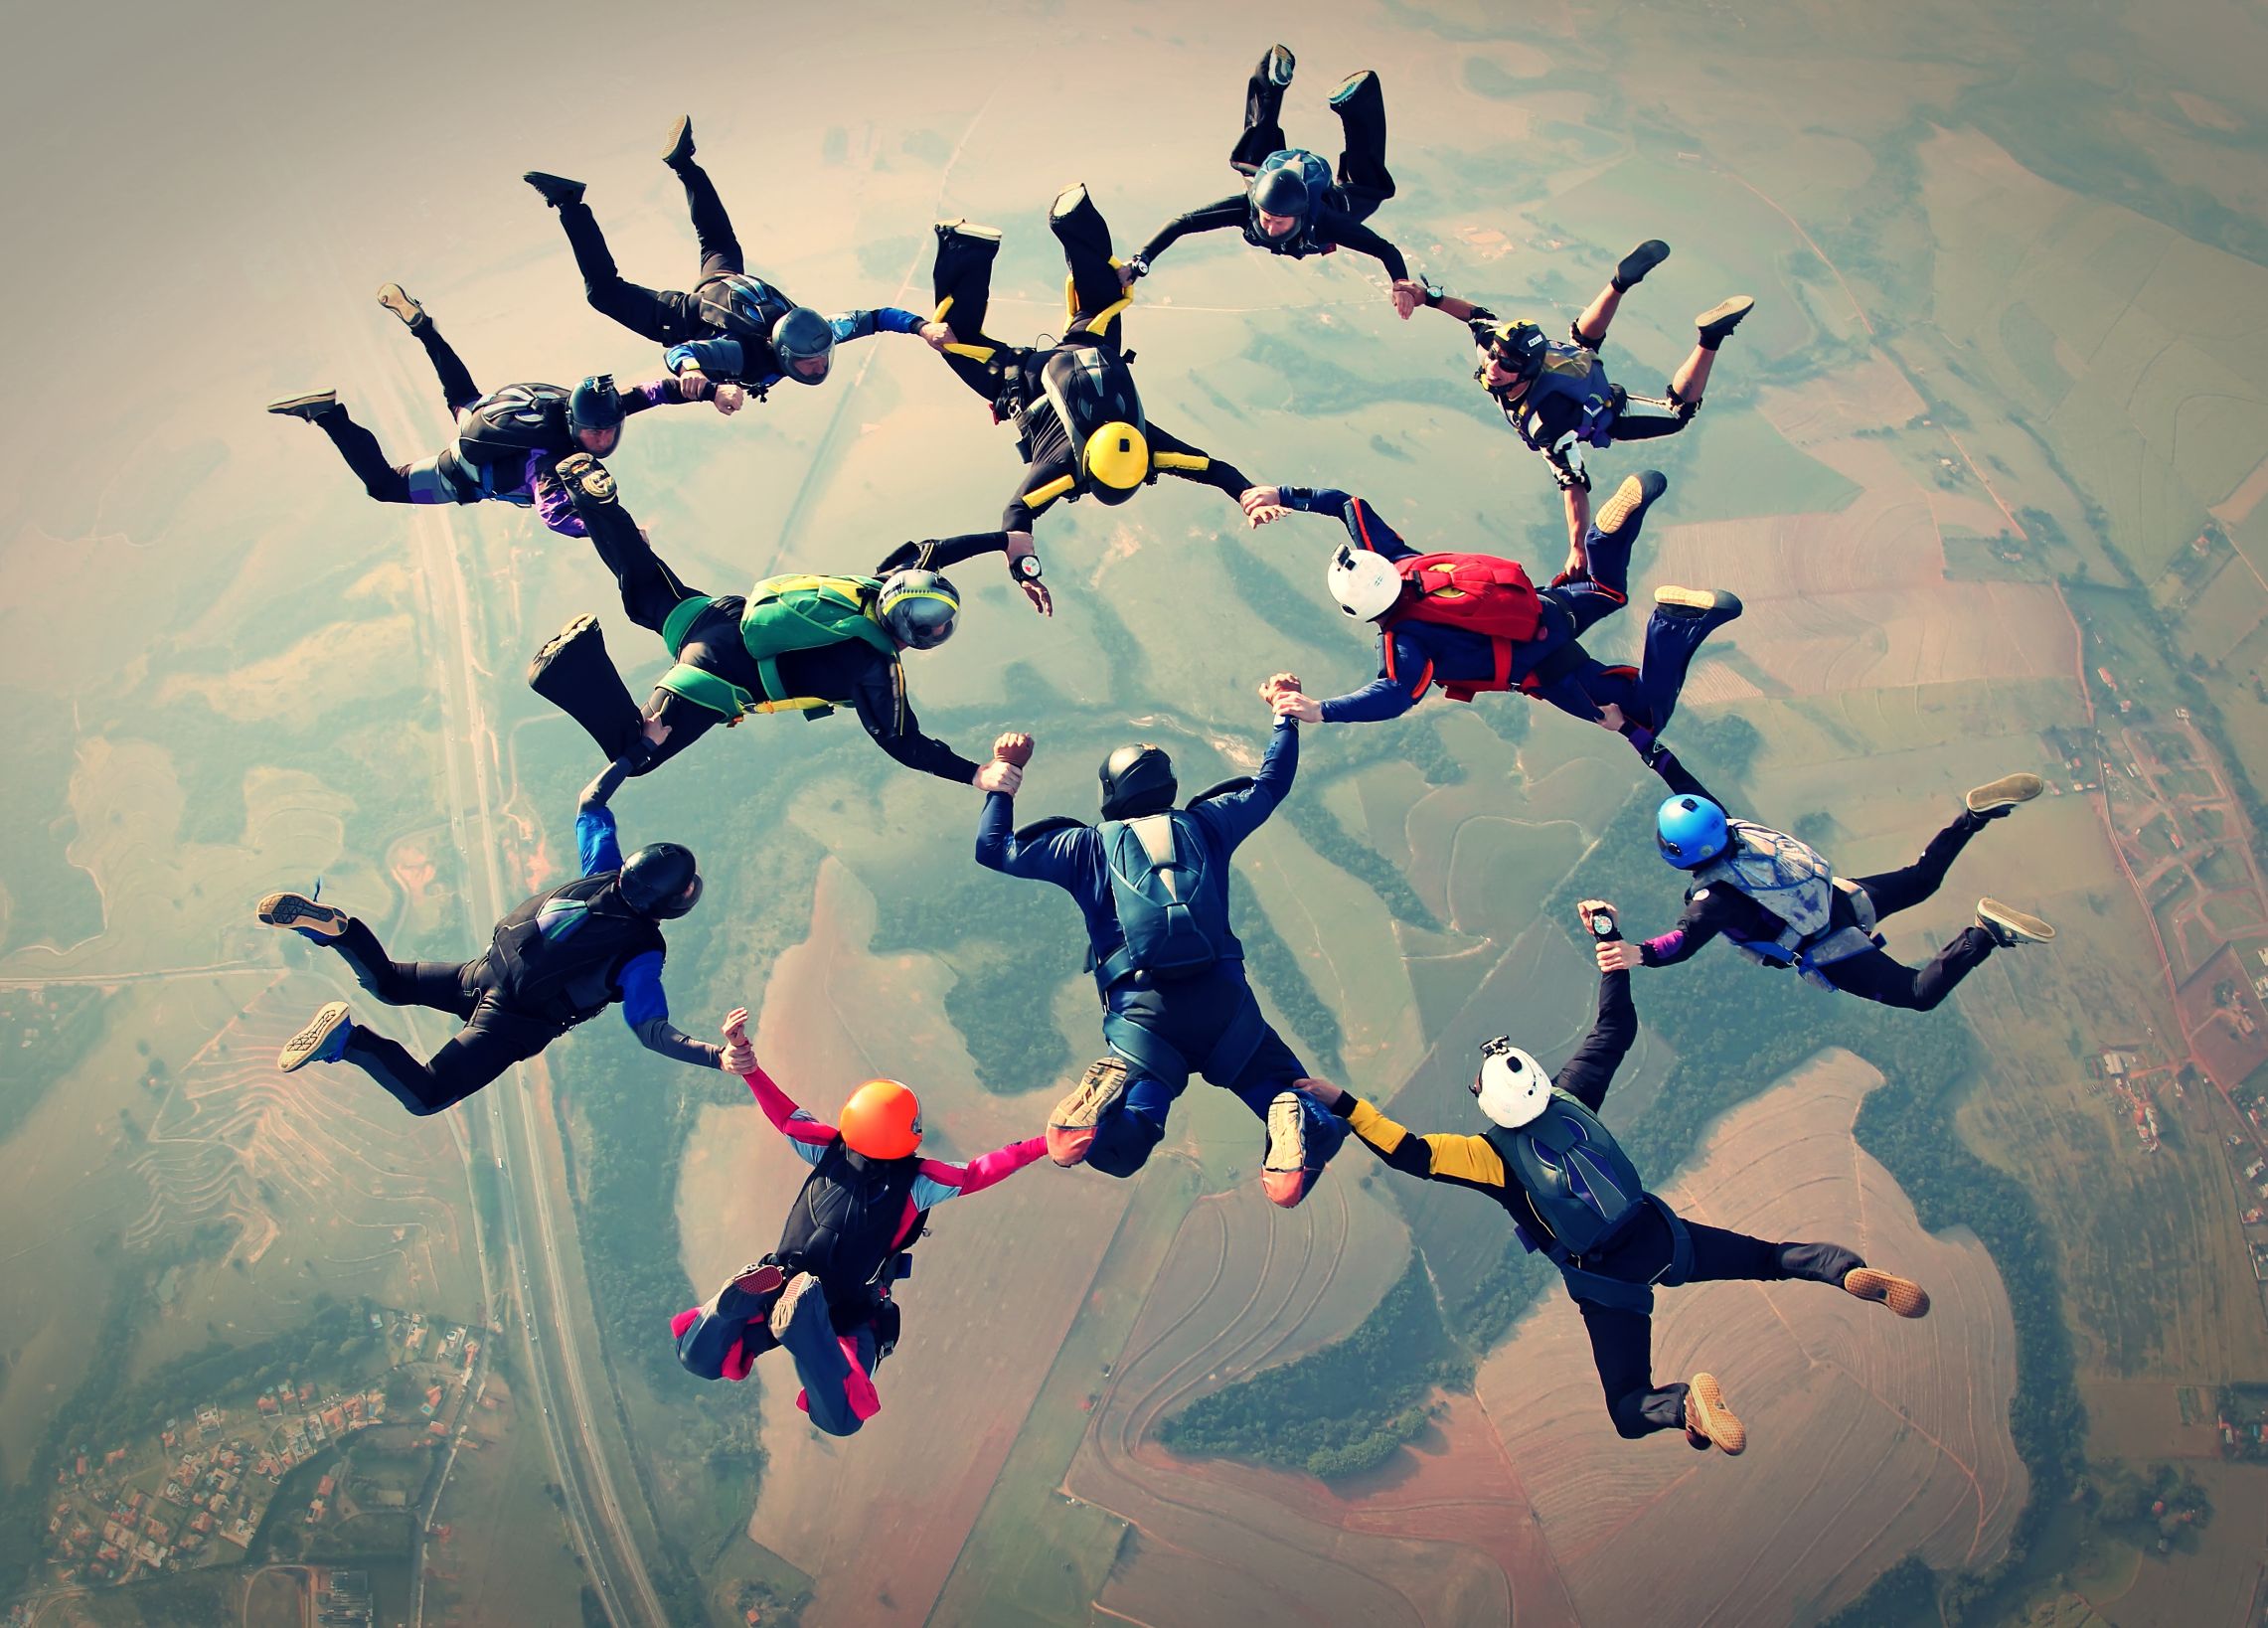 An image showing skydivers forming a shape to signify collaboration.